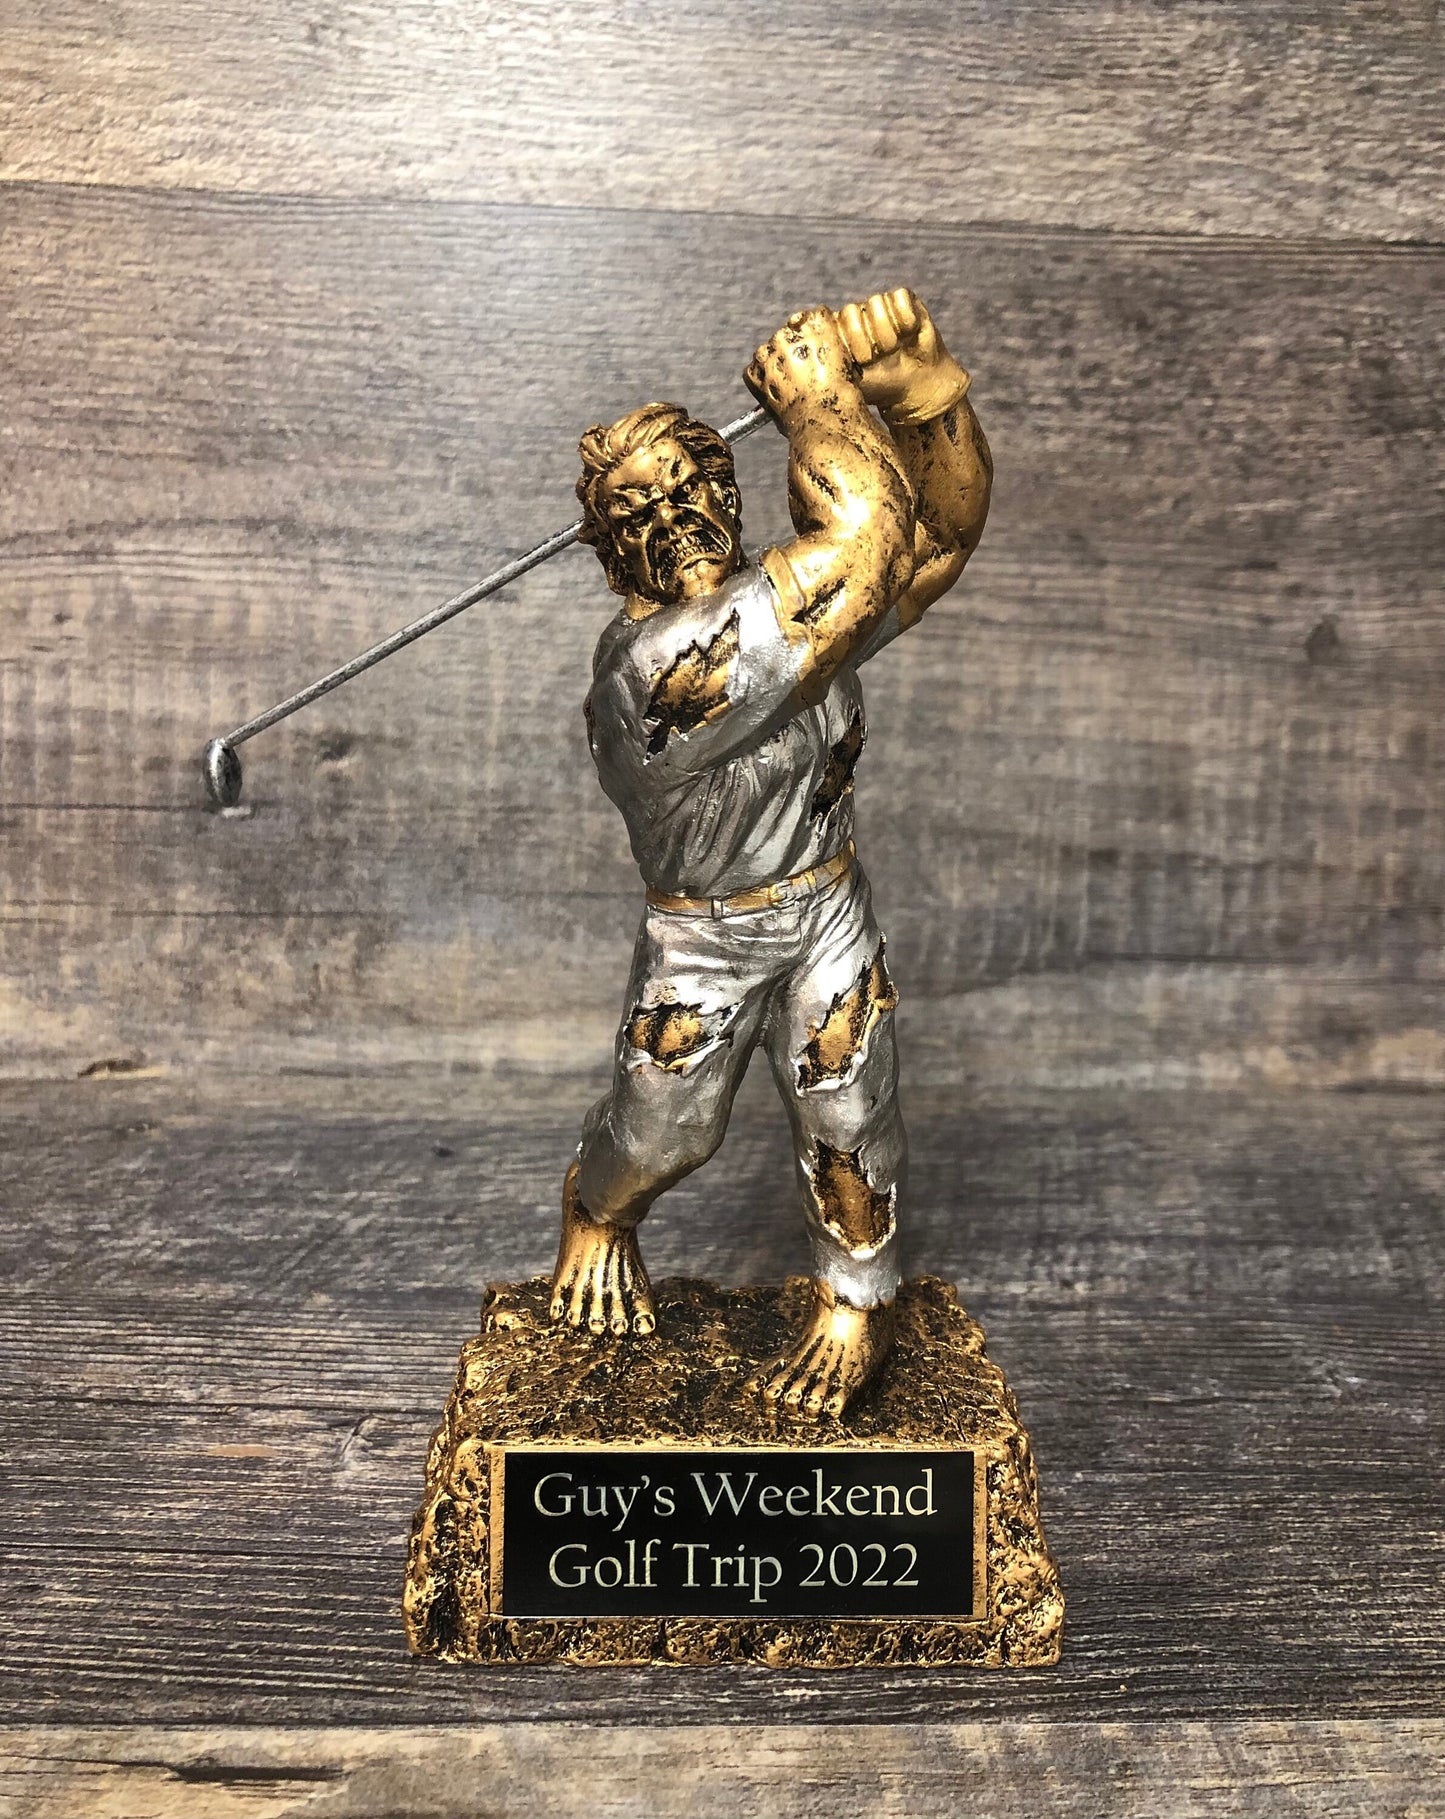 Golf Trophy Tournament Beast Trophy Classic Golf Charity Event Trophy Hole In One Under Par Beast Bragging Right Best Score Guys Weekend